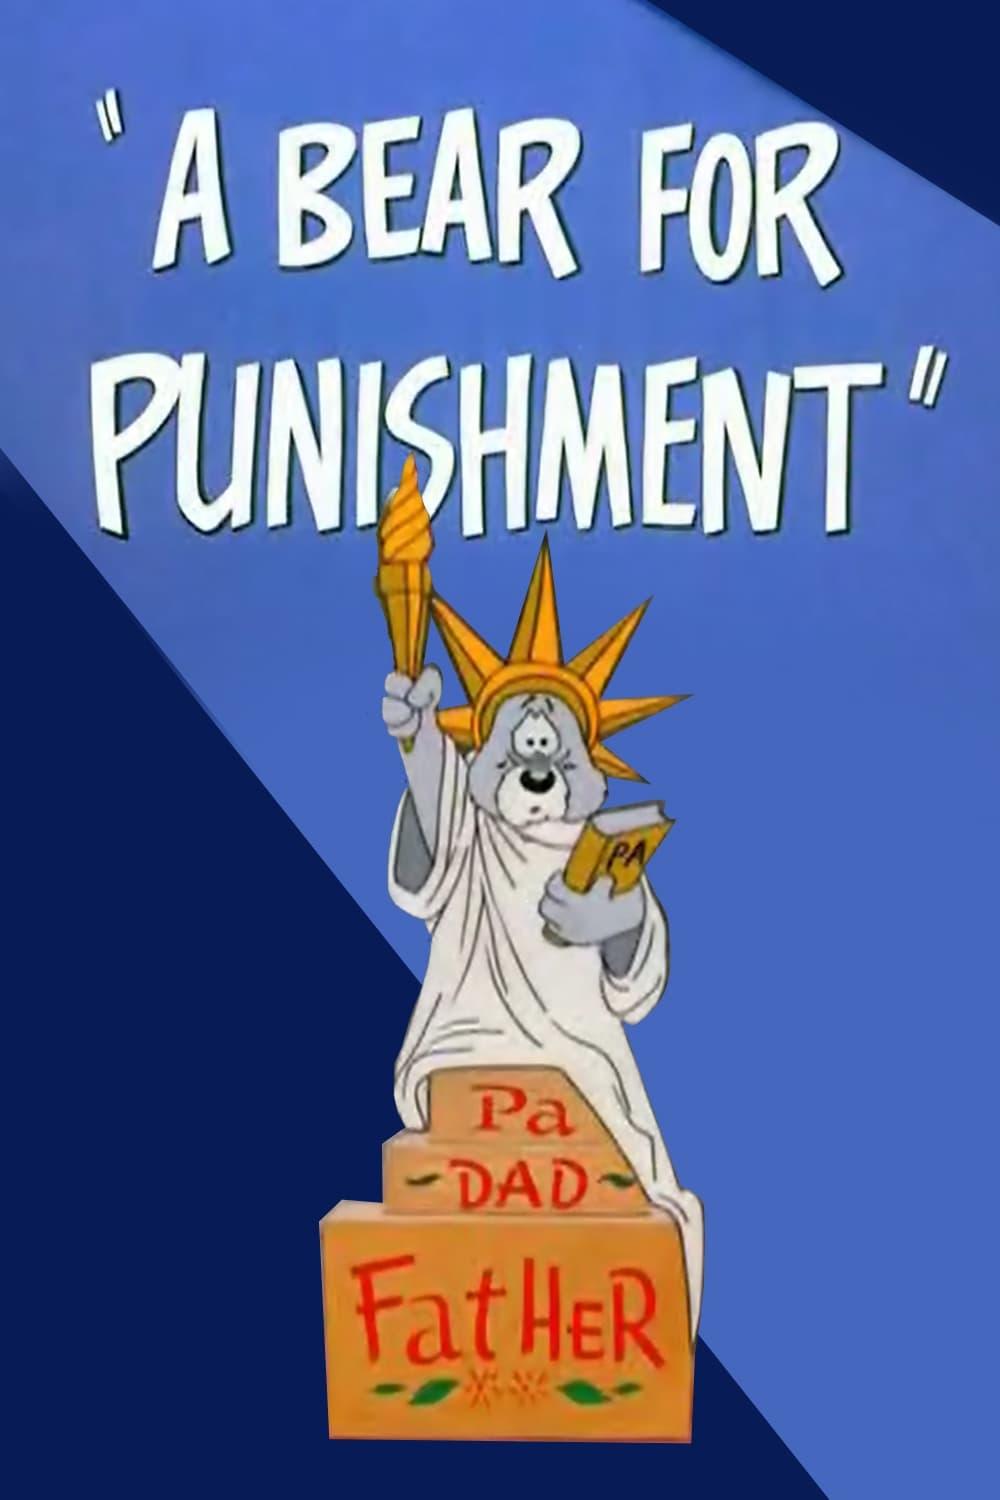 A Bear for Punishment poster